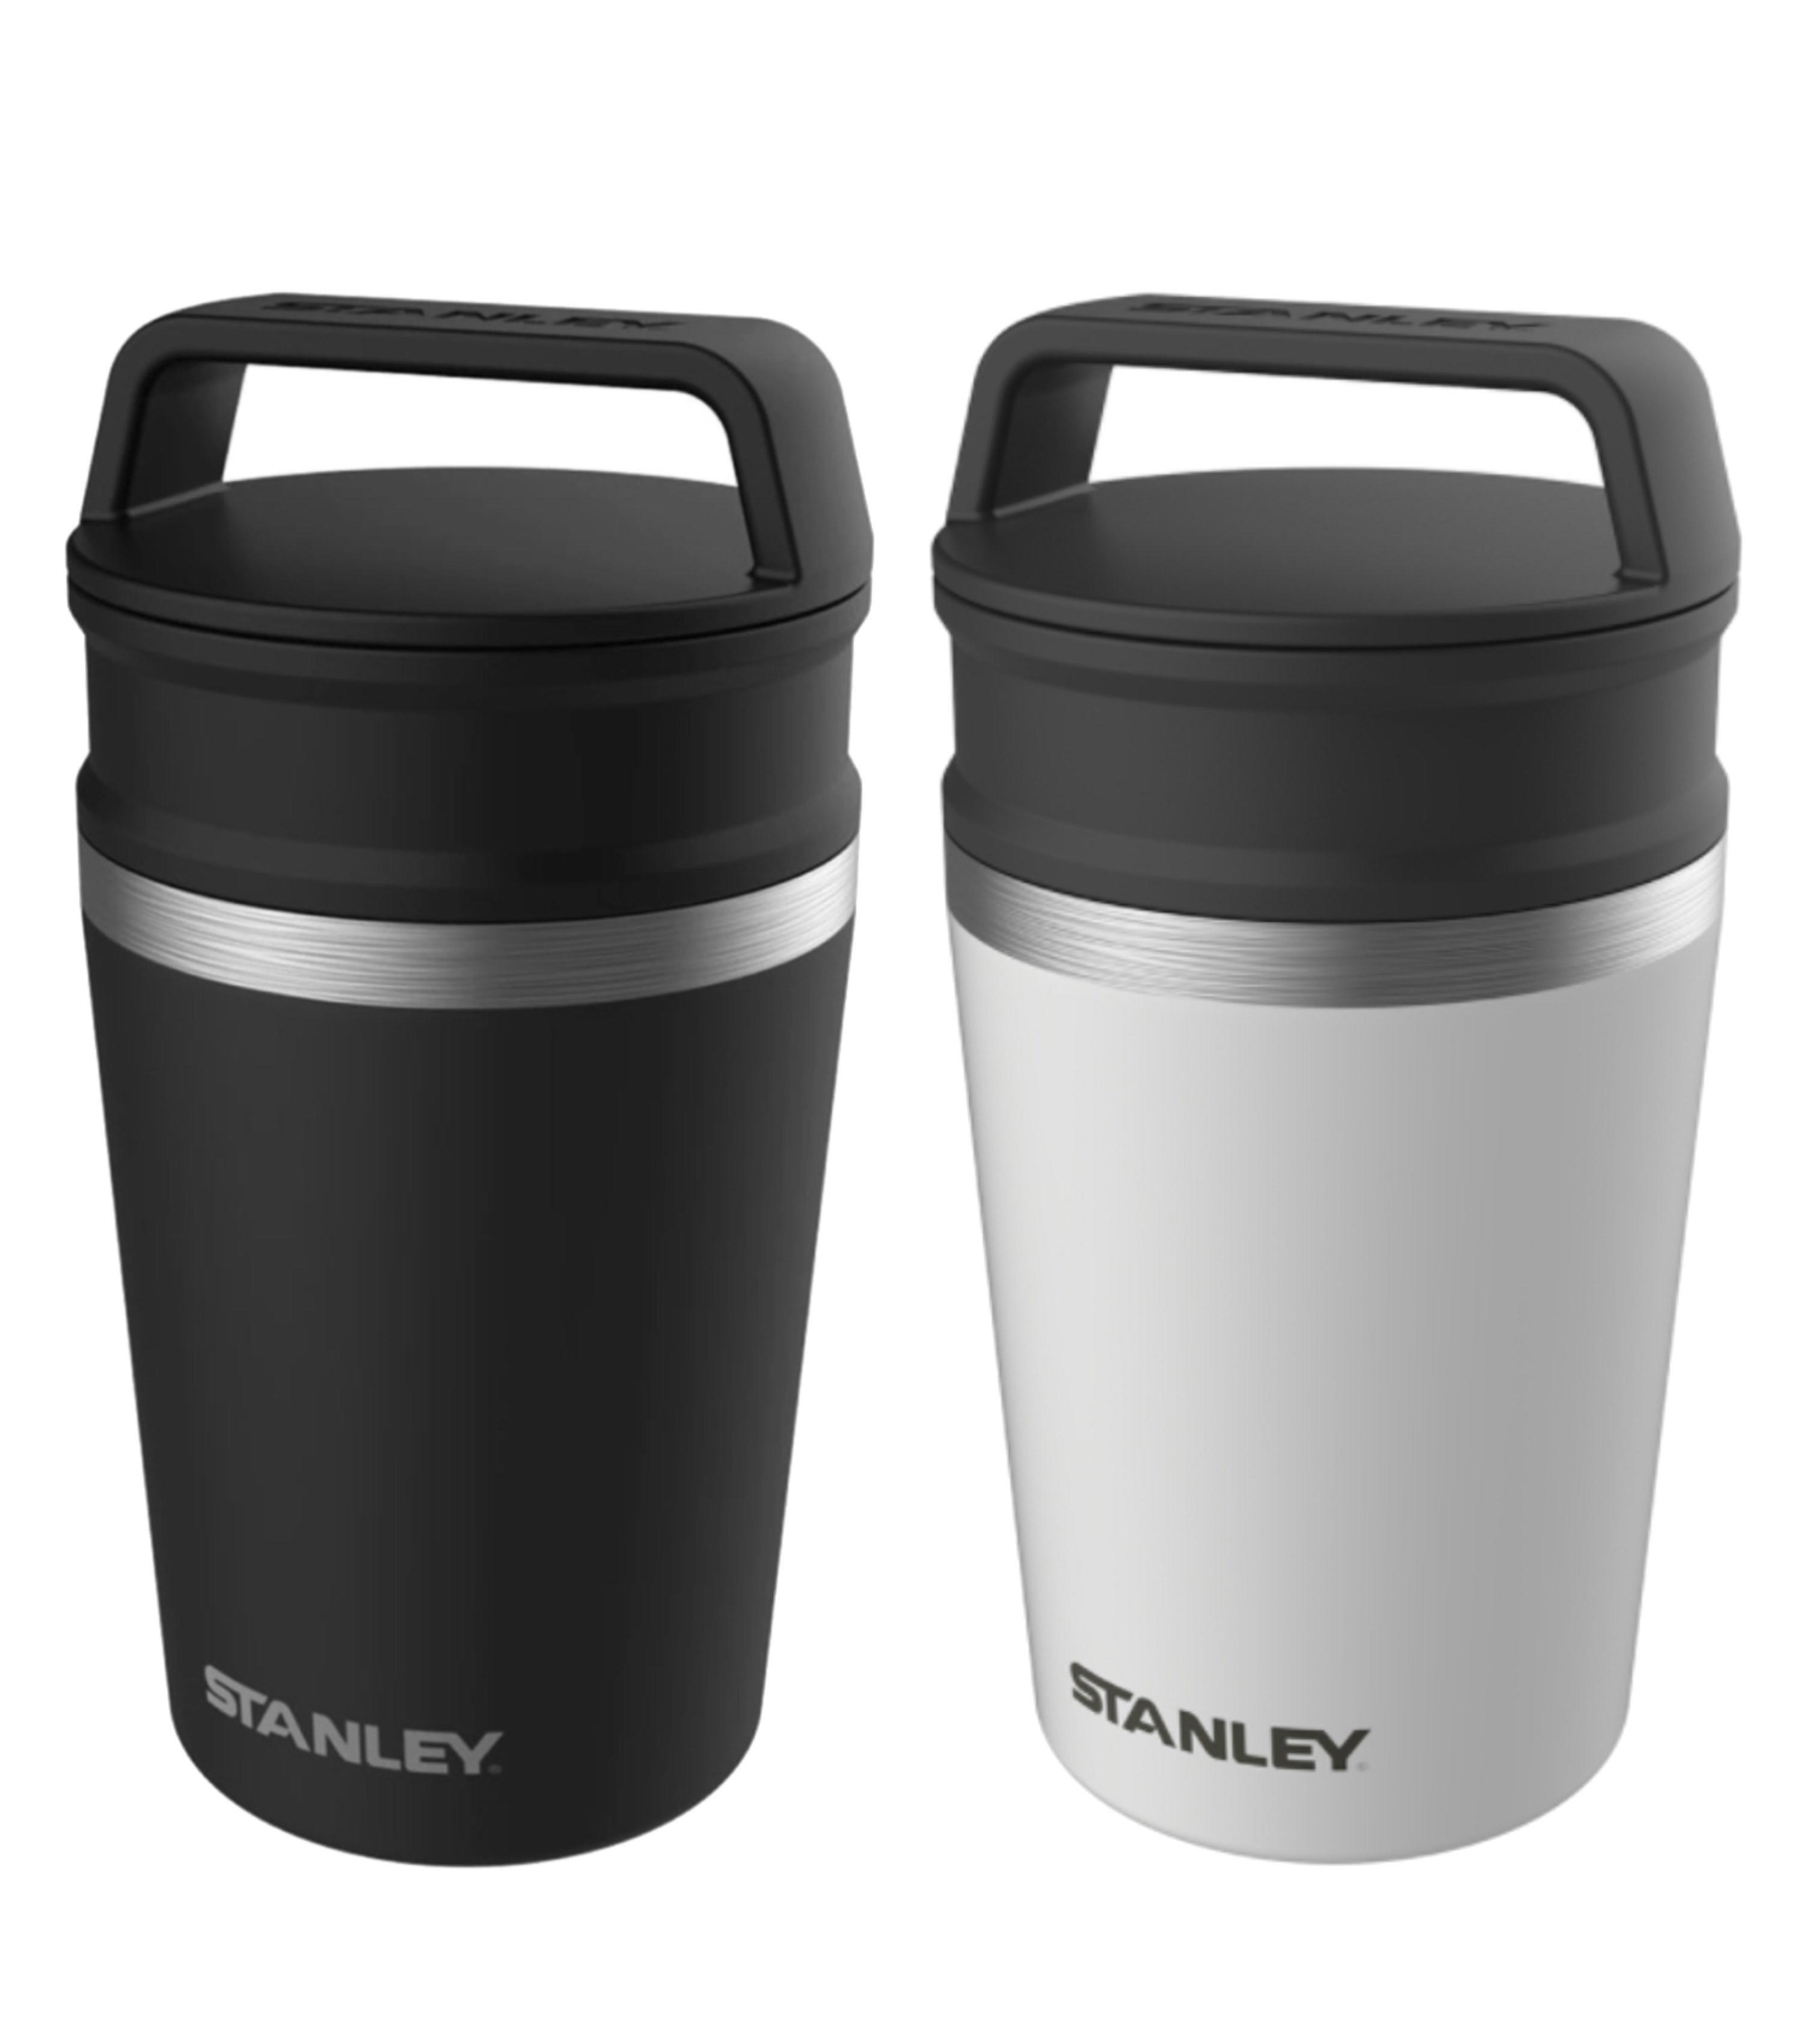 http://www.traveluniverse.com.au/Shared/Images/Product/Stanley-230ml-Vacuum-Insulated-Shortstack-Mug/88530-group.jpg